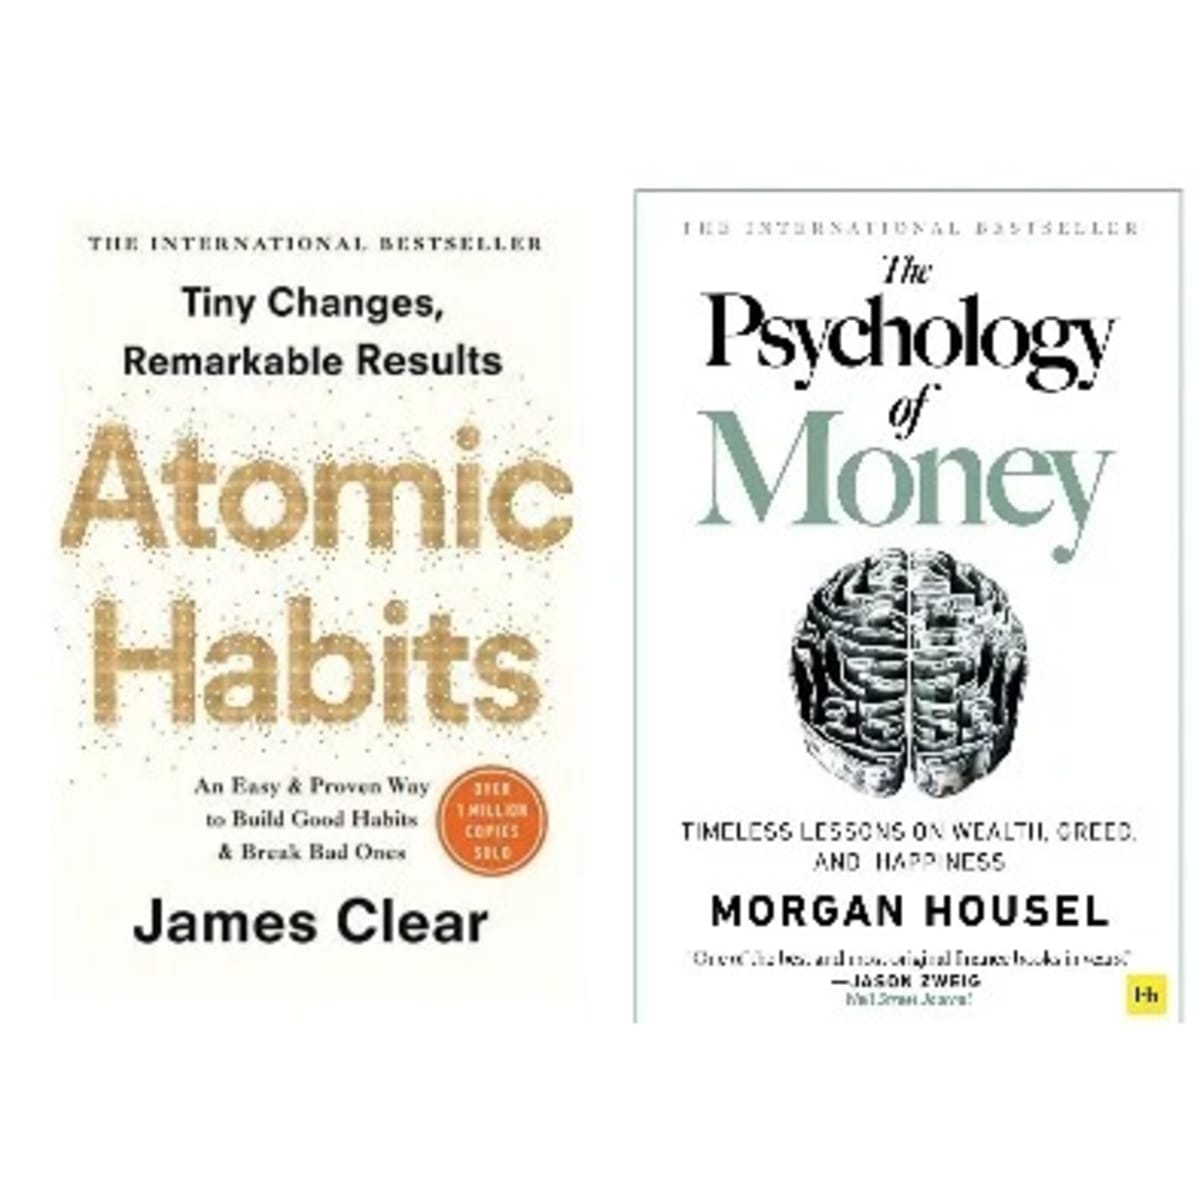 Atomic Habits (Mr-Exp) : An Easy & Proven Way to Build Good Habits & Break  Bad Ones (Paperback)